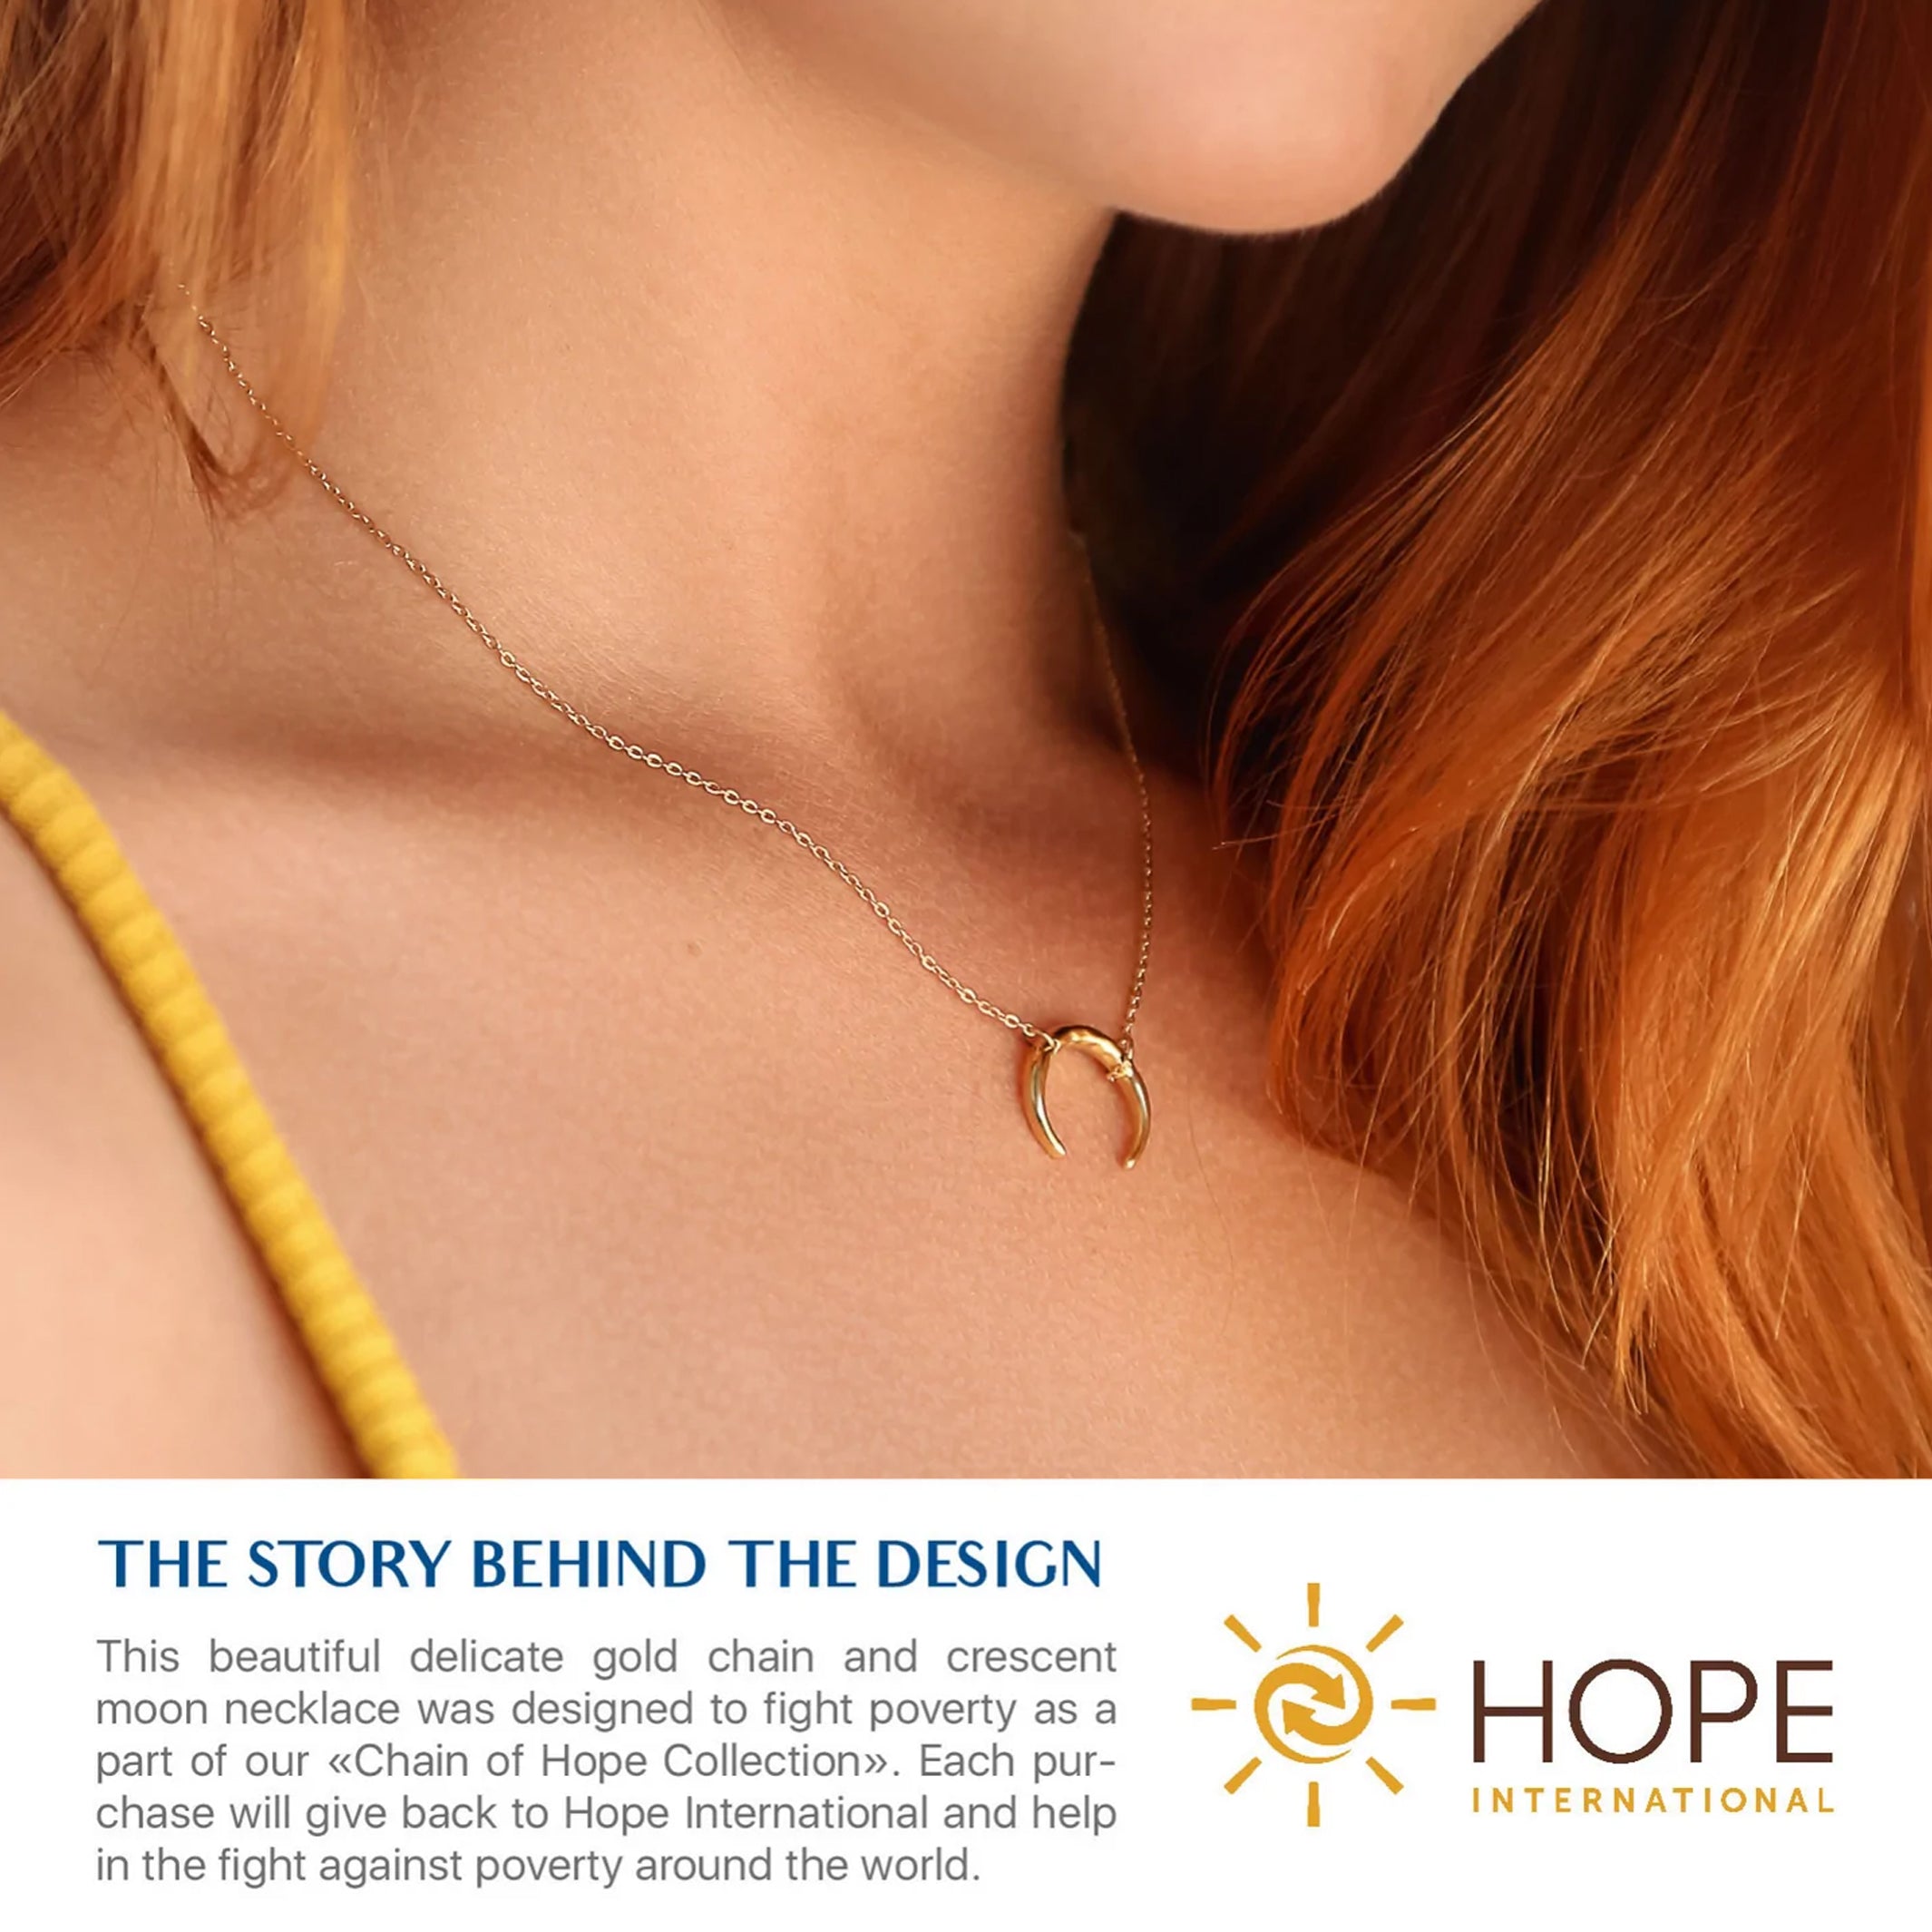 Crescent Moon Necklace from HumanKind Fair Trade - HumanKind Fair Trade